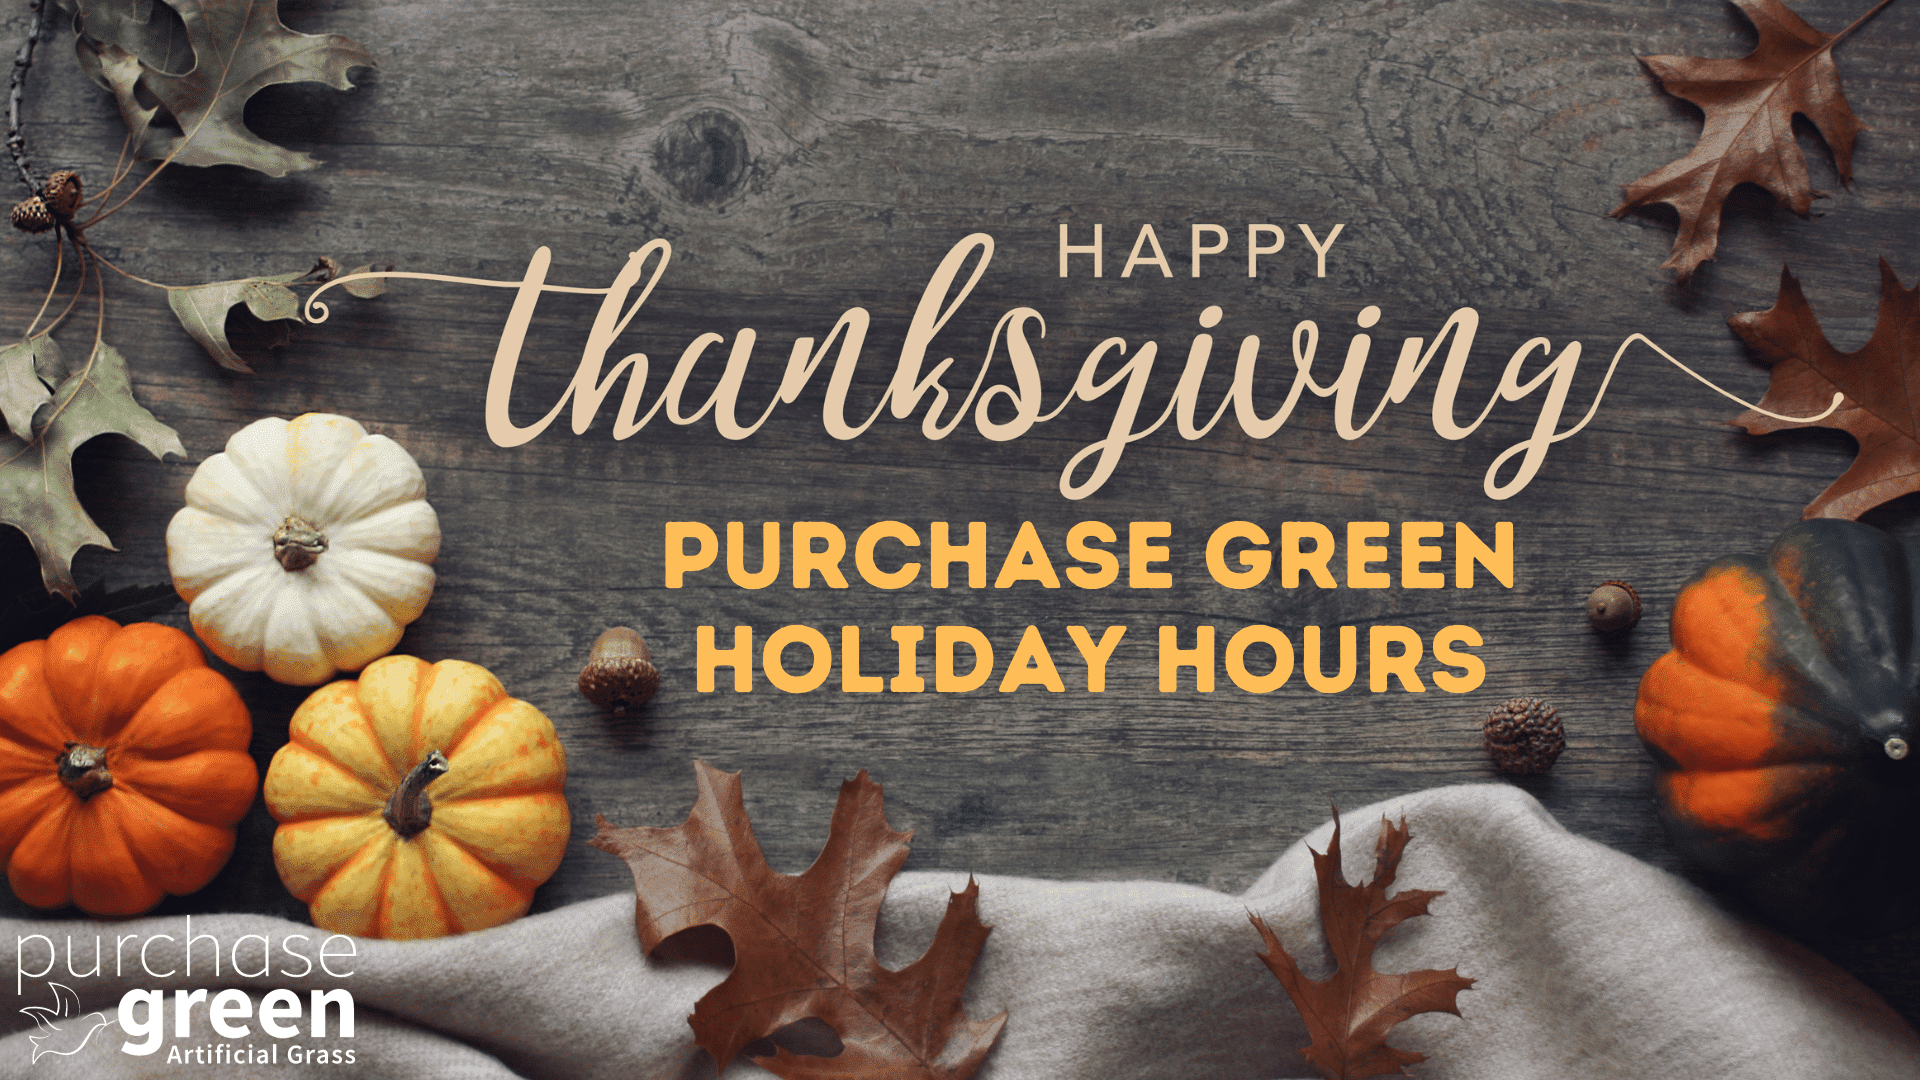 Thanksgiving Store Hours